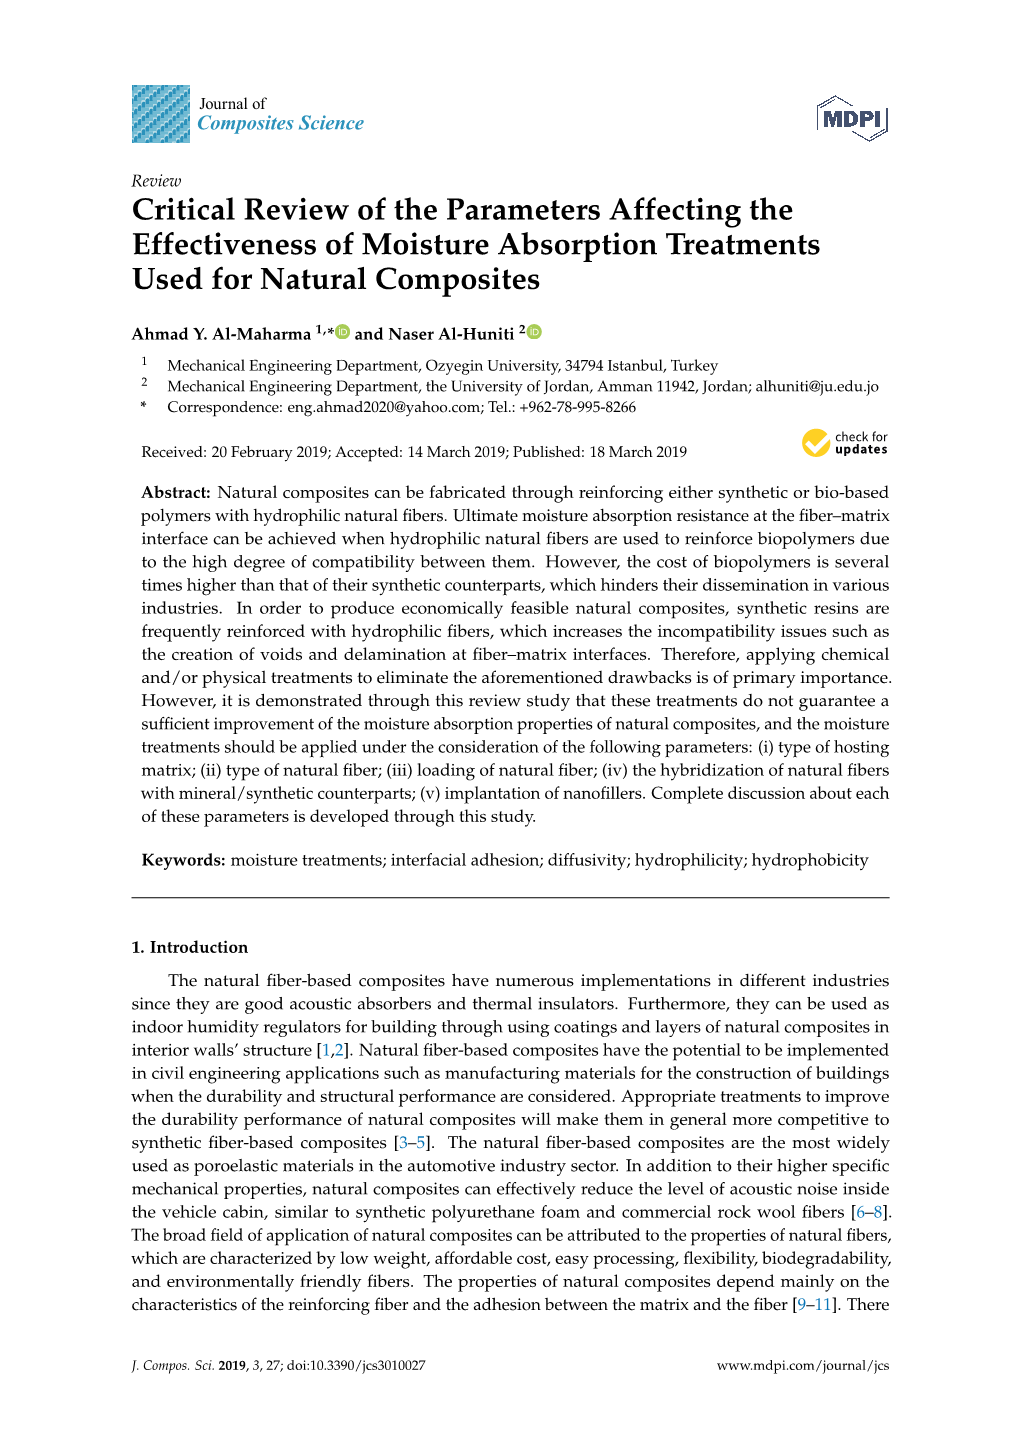 Critical Review of the Parameters Affecting the Effectiveness of Moisture Absorption Treatments Used for Natural Composites